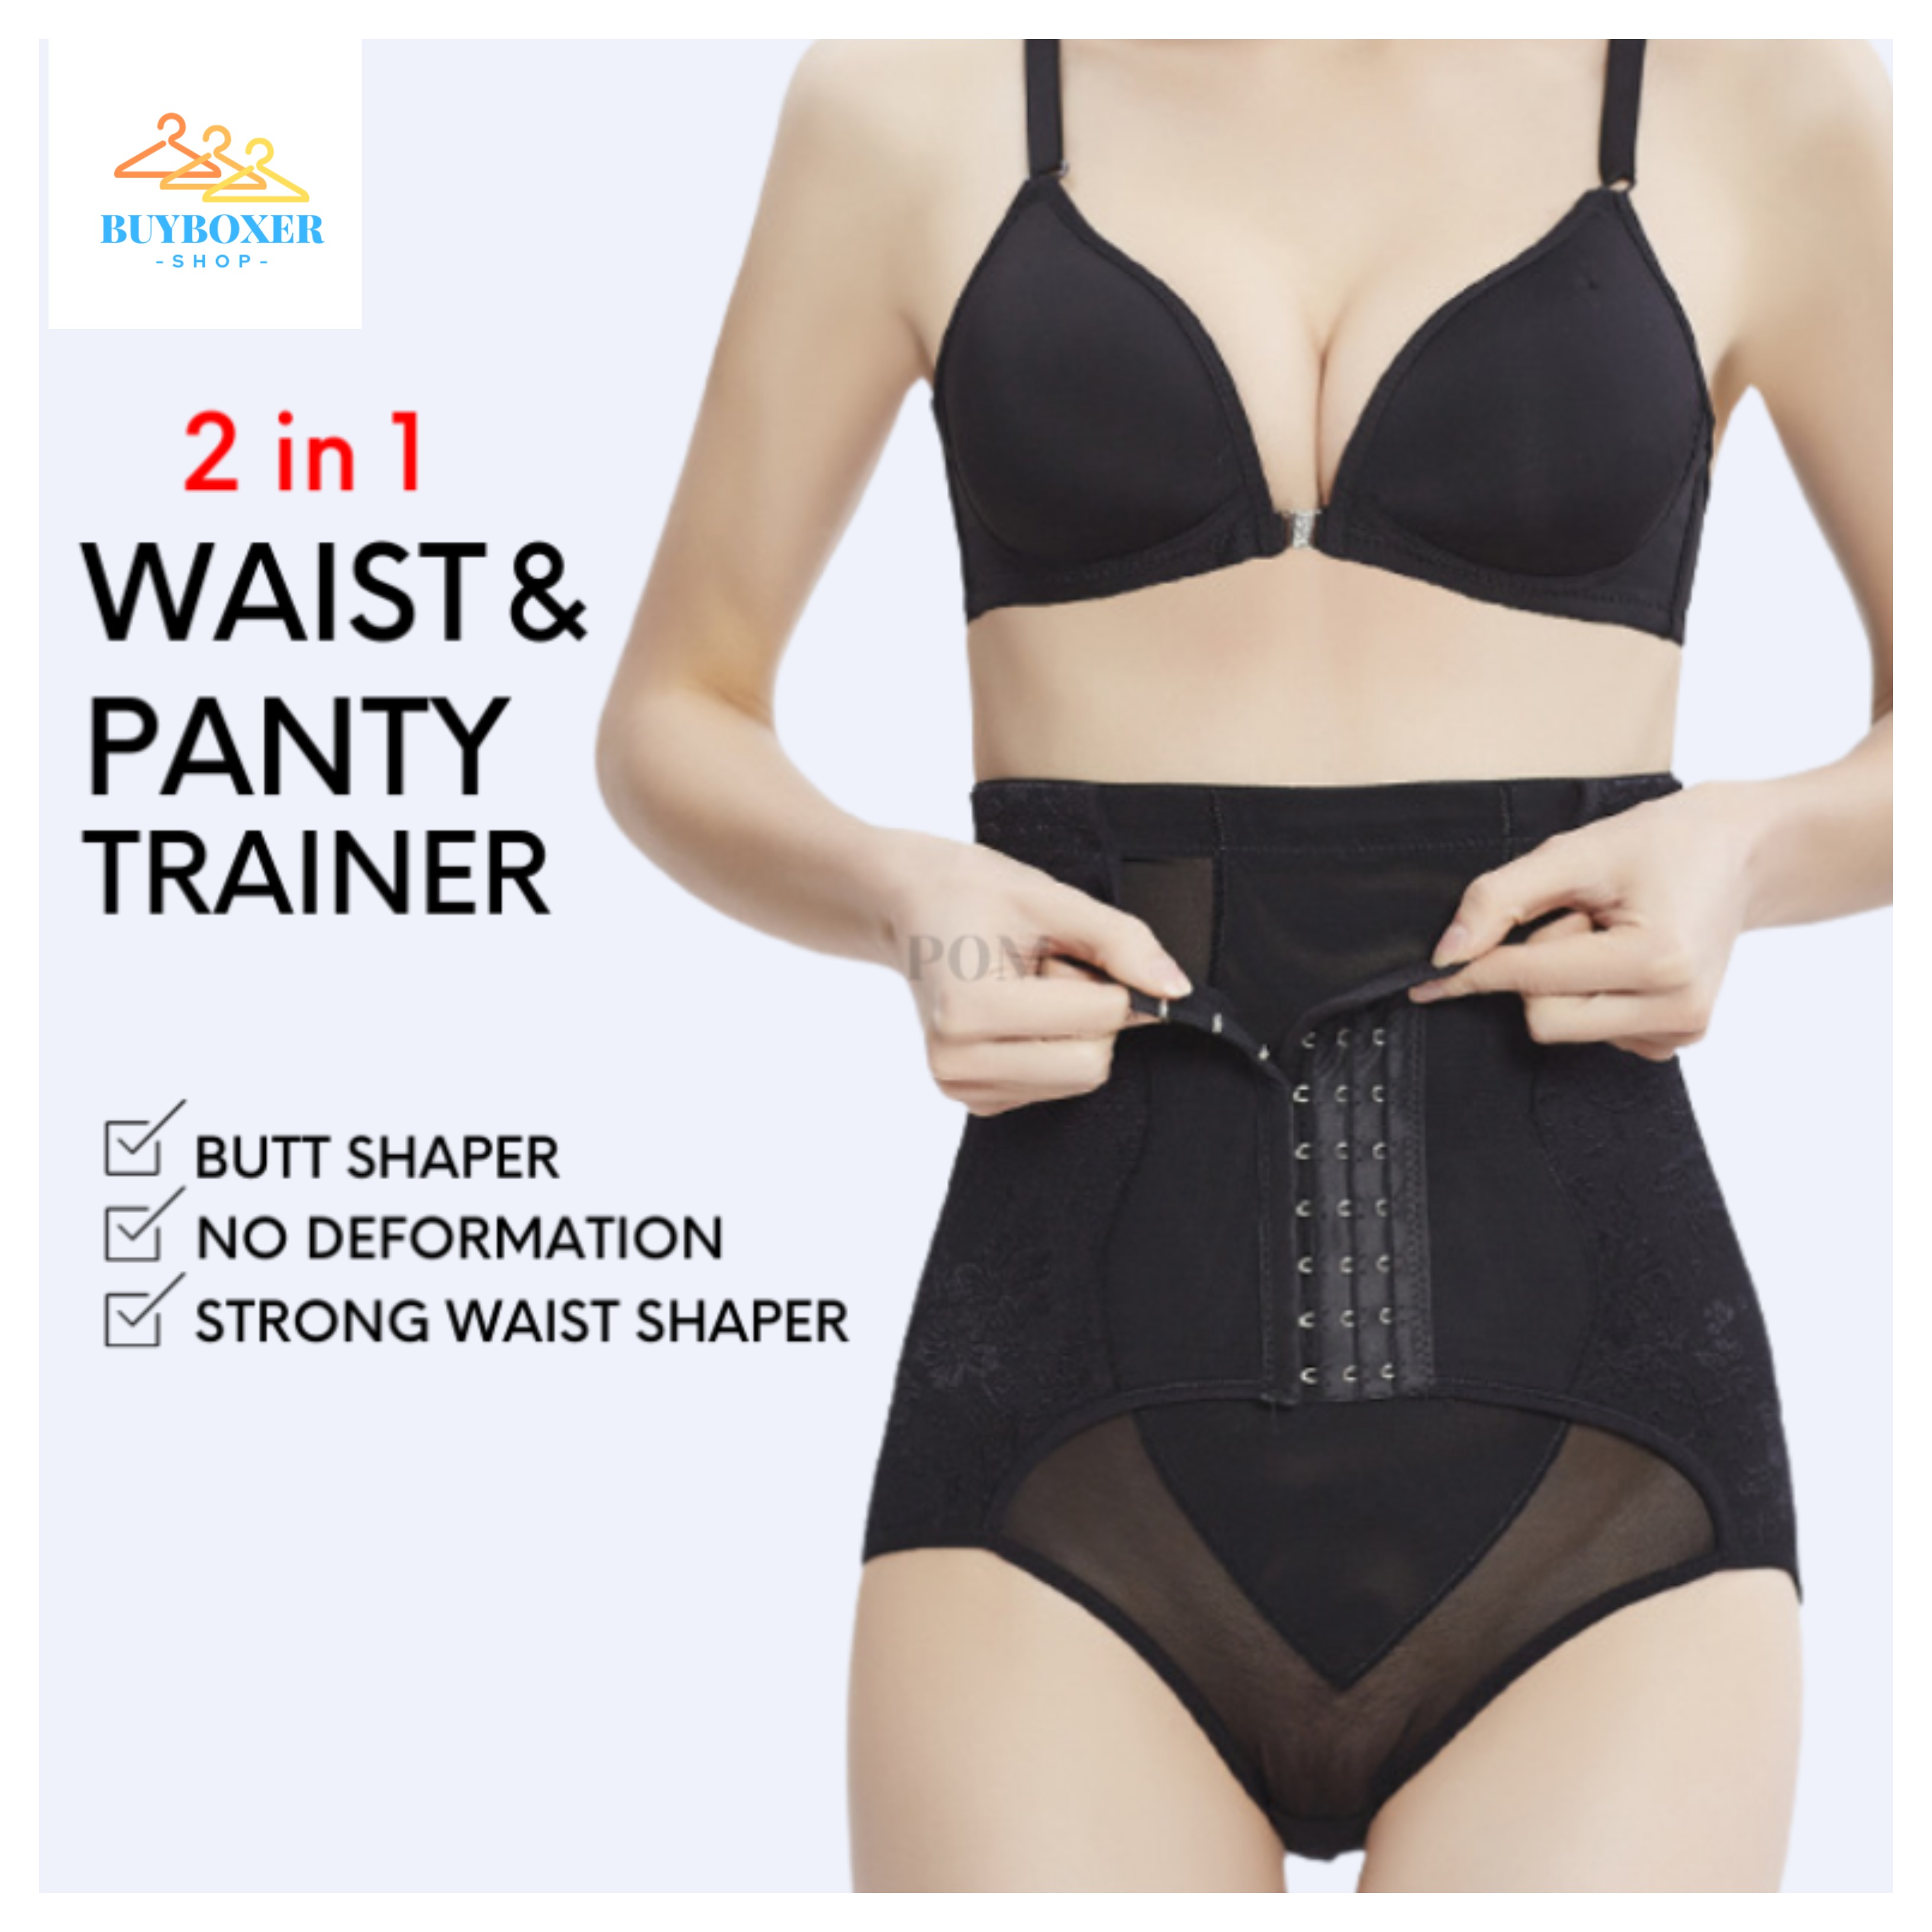 BUYBOXER High Waist Trainer Panty 2 in 1 Tummy Girdle Lifting Slimming Waist  Panties Body Shaper